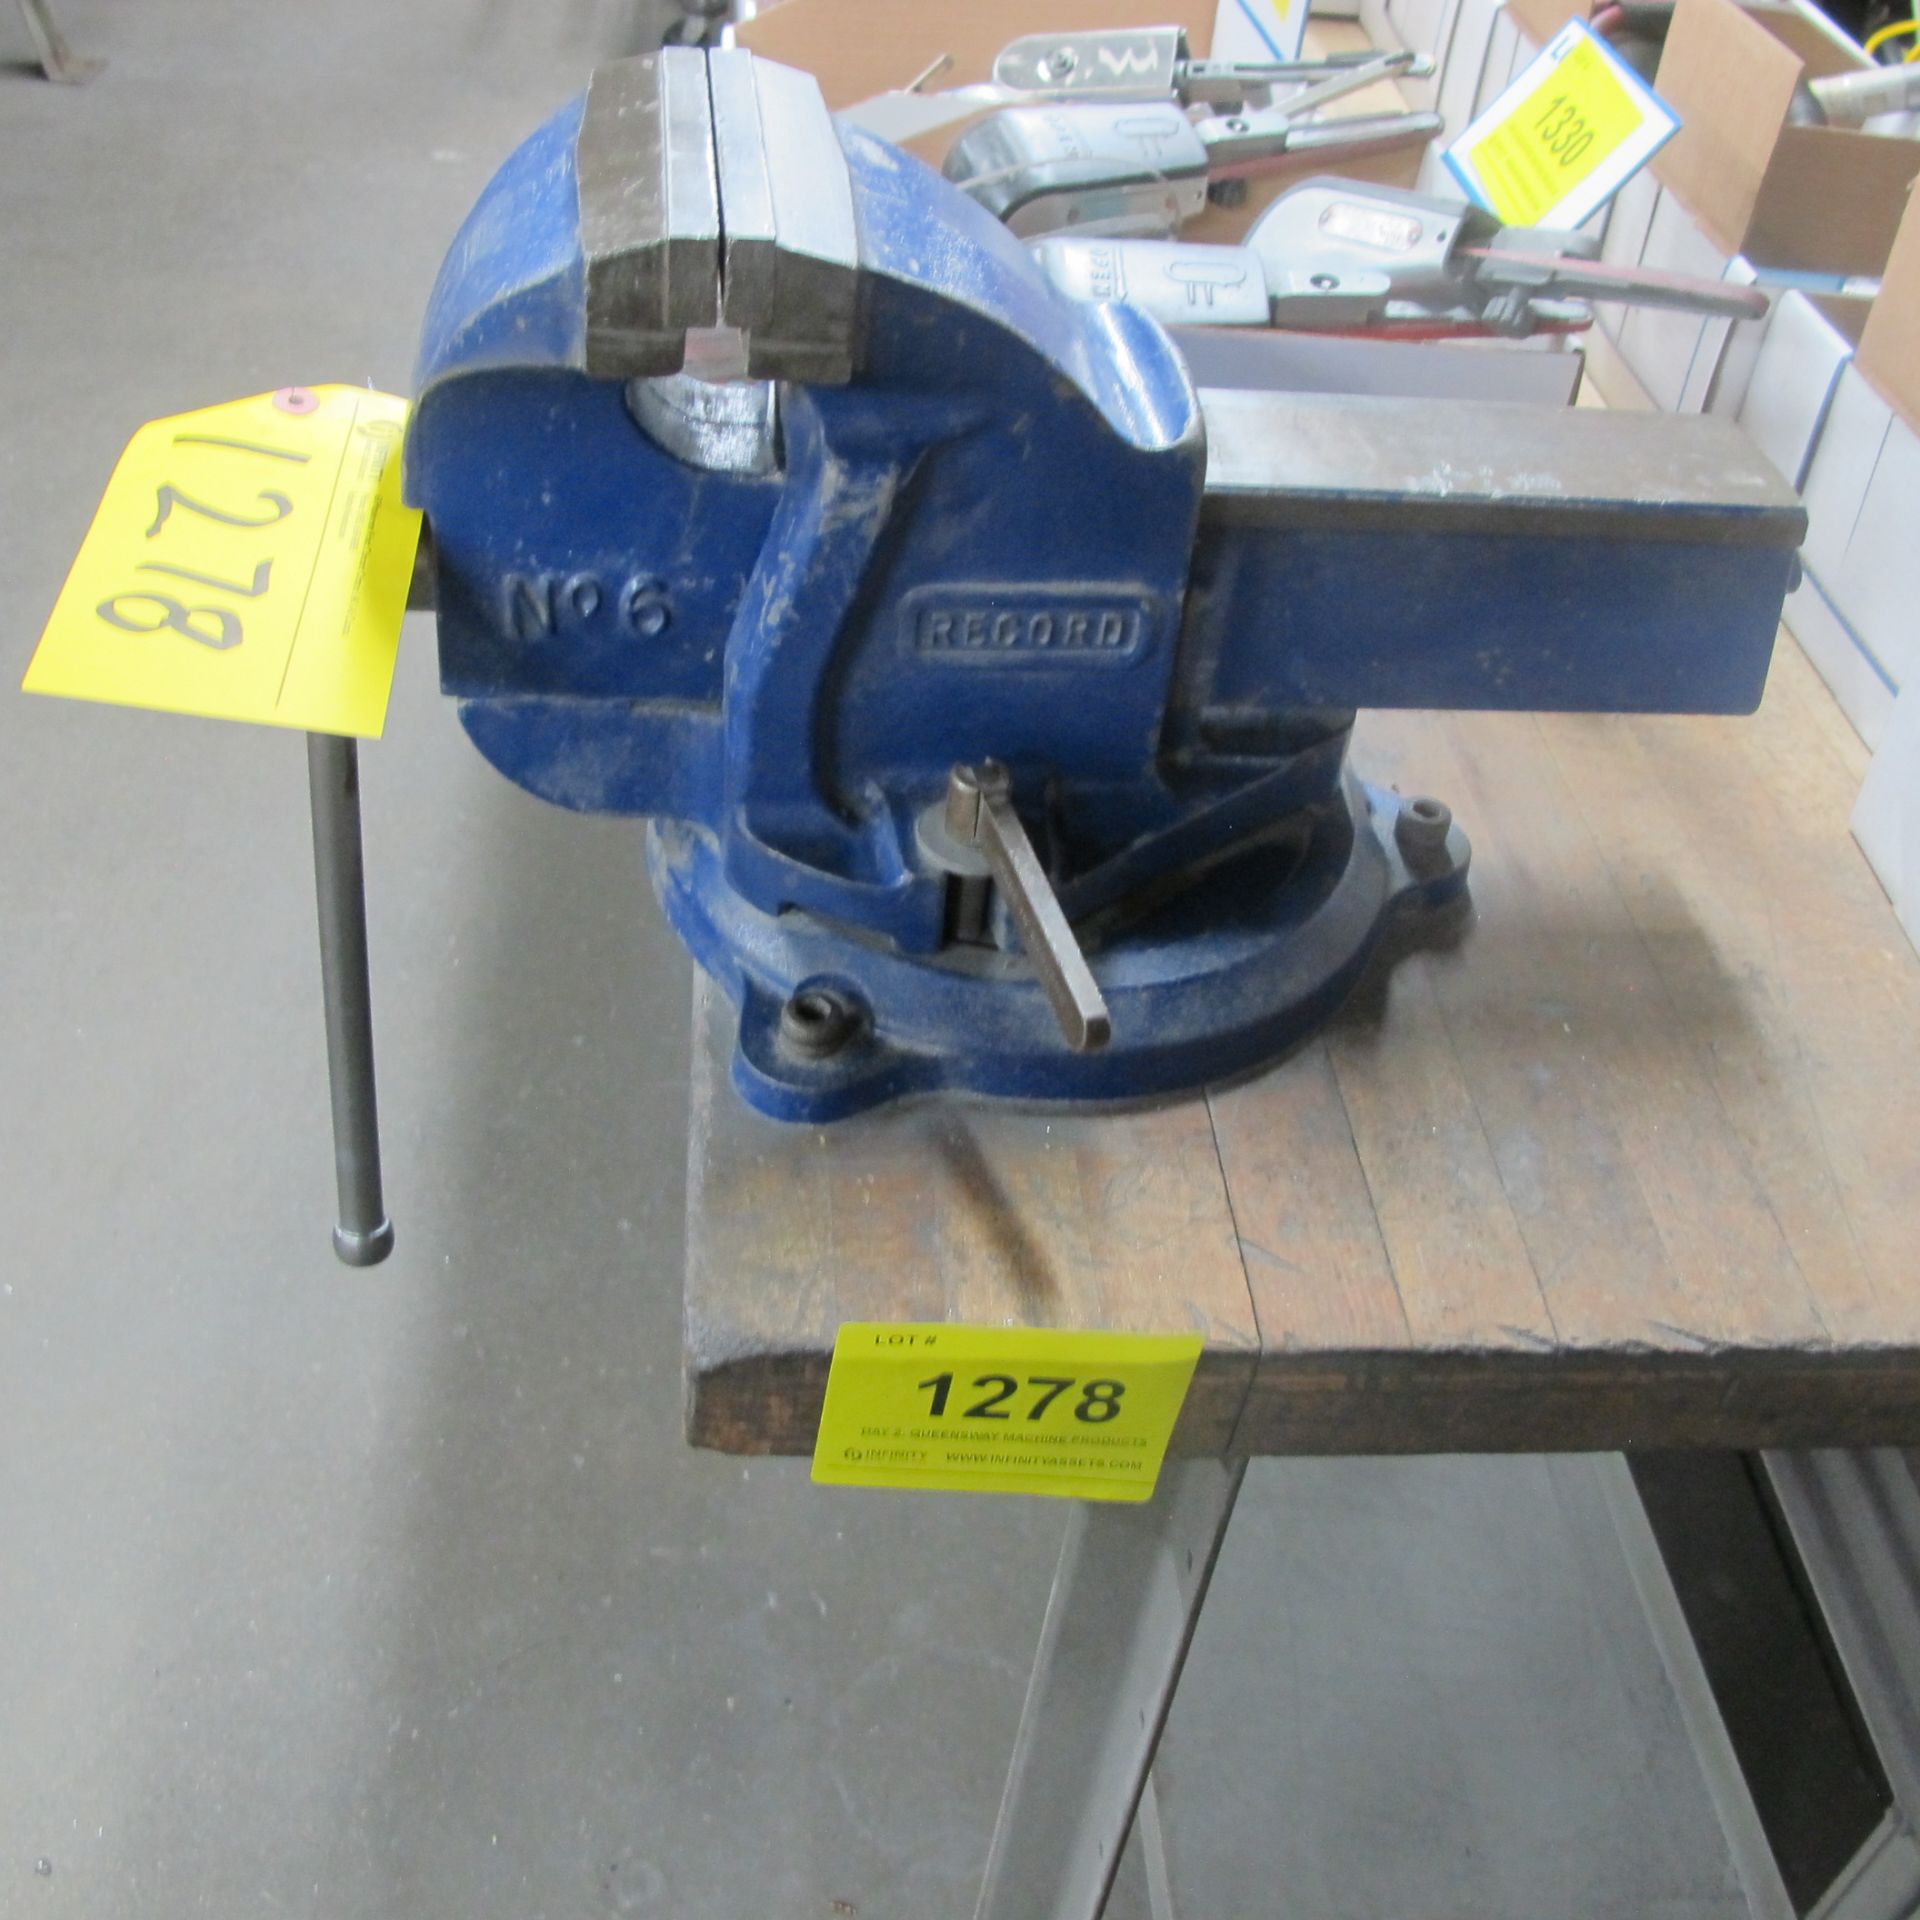 LOT OF (2) WORKBENCHES W/ RECORD 6" VISE (NO CONTENTS) - Image 3 of 3